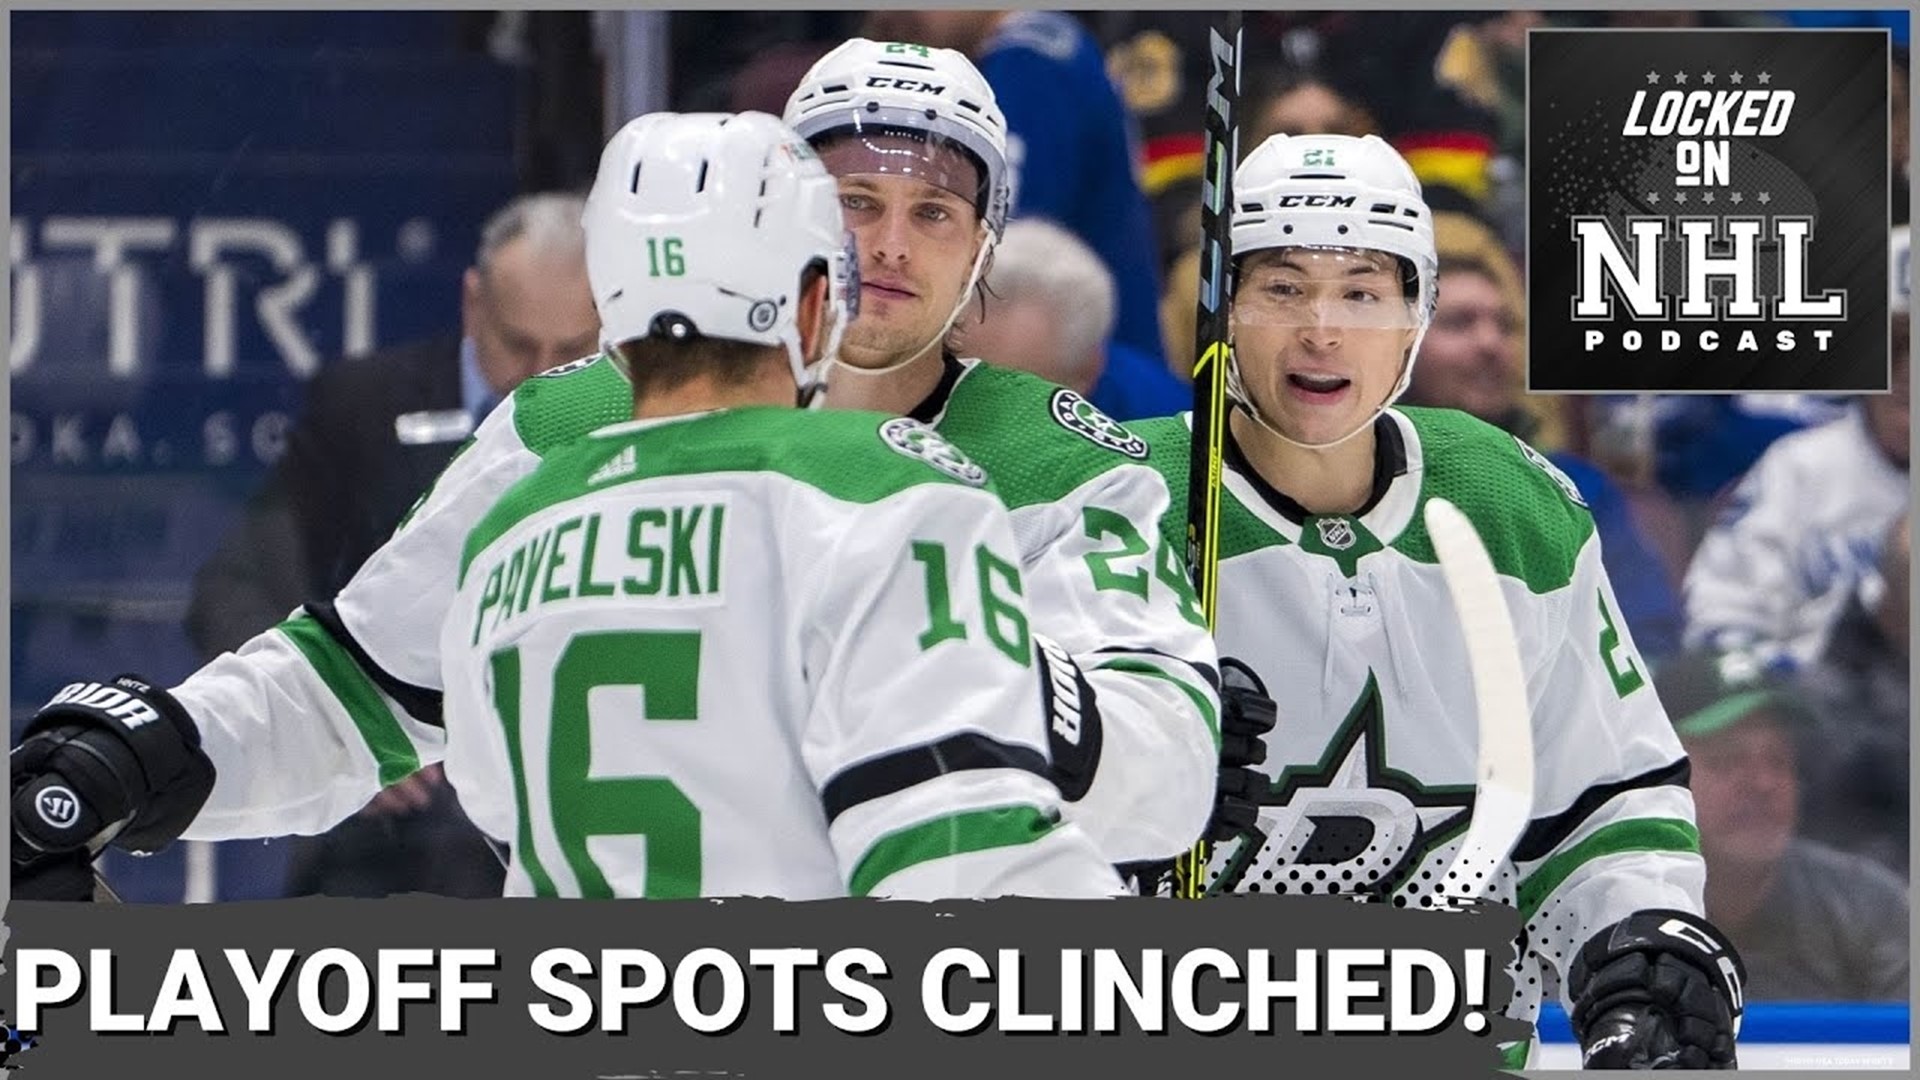 Teams are starting to clinch spots in the Stanley Cup Playoffs. Four teams accomplished that Thursday in the NHL.